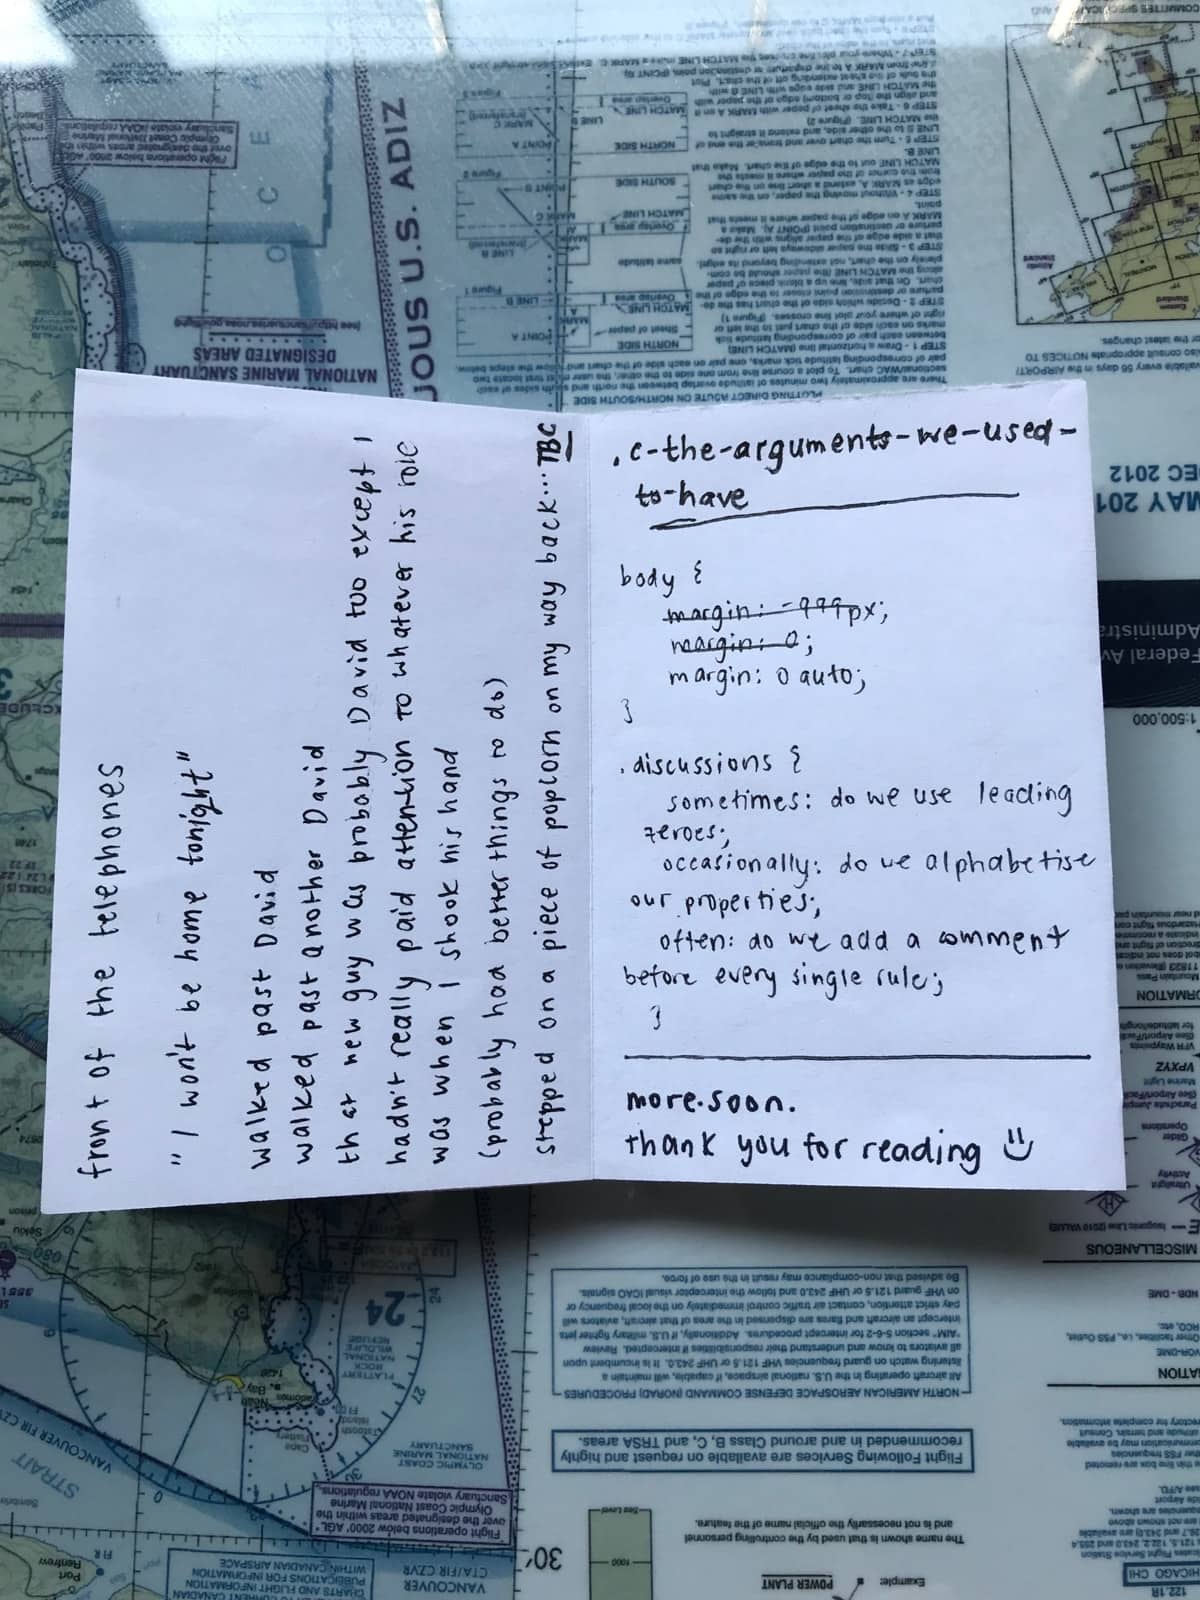 The inside of a zine with part of a poem excerpt and another excerpt titled “.c-the-arguments-we-used-to-have”